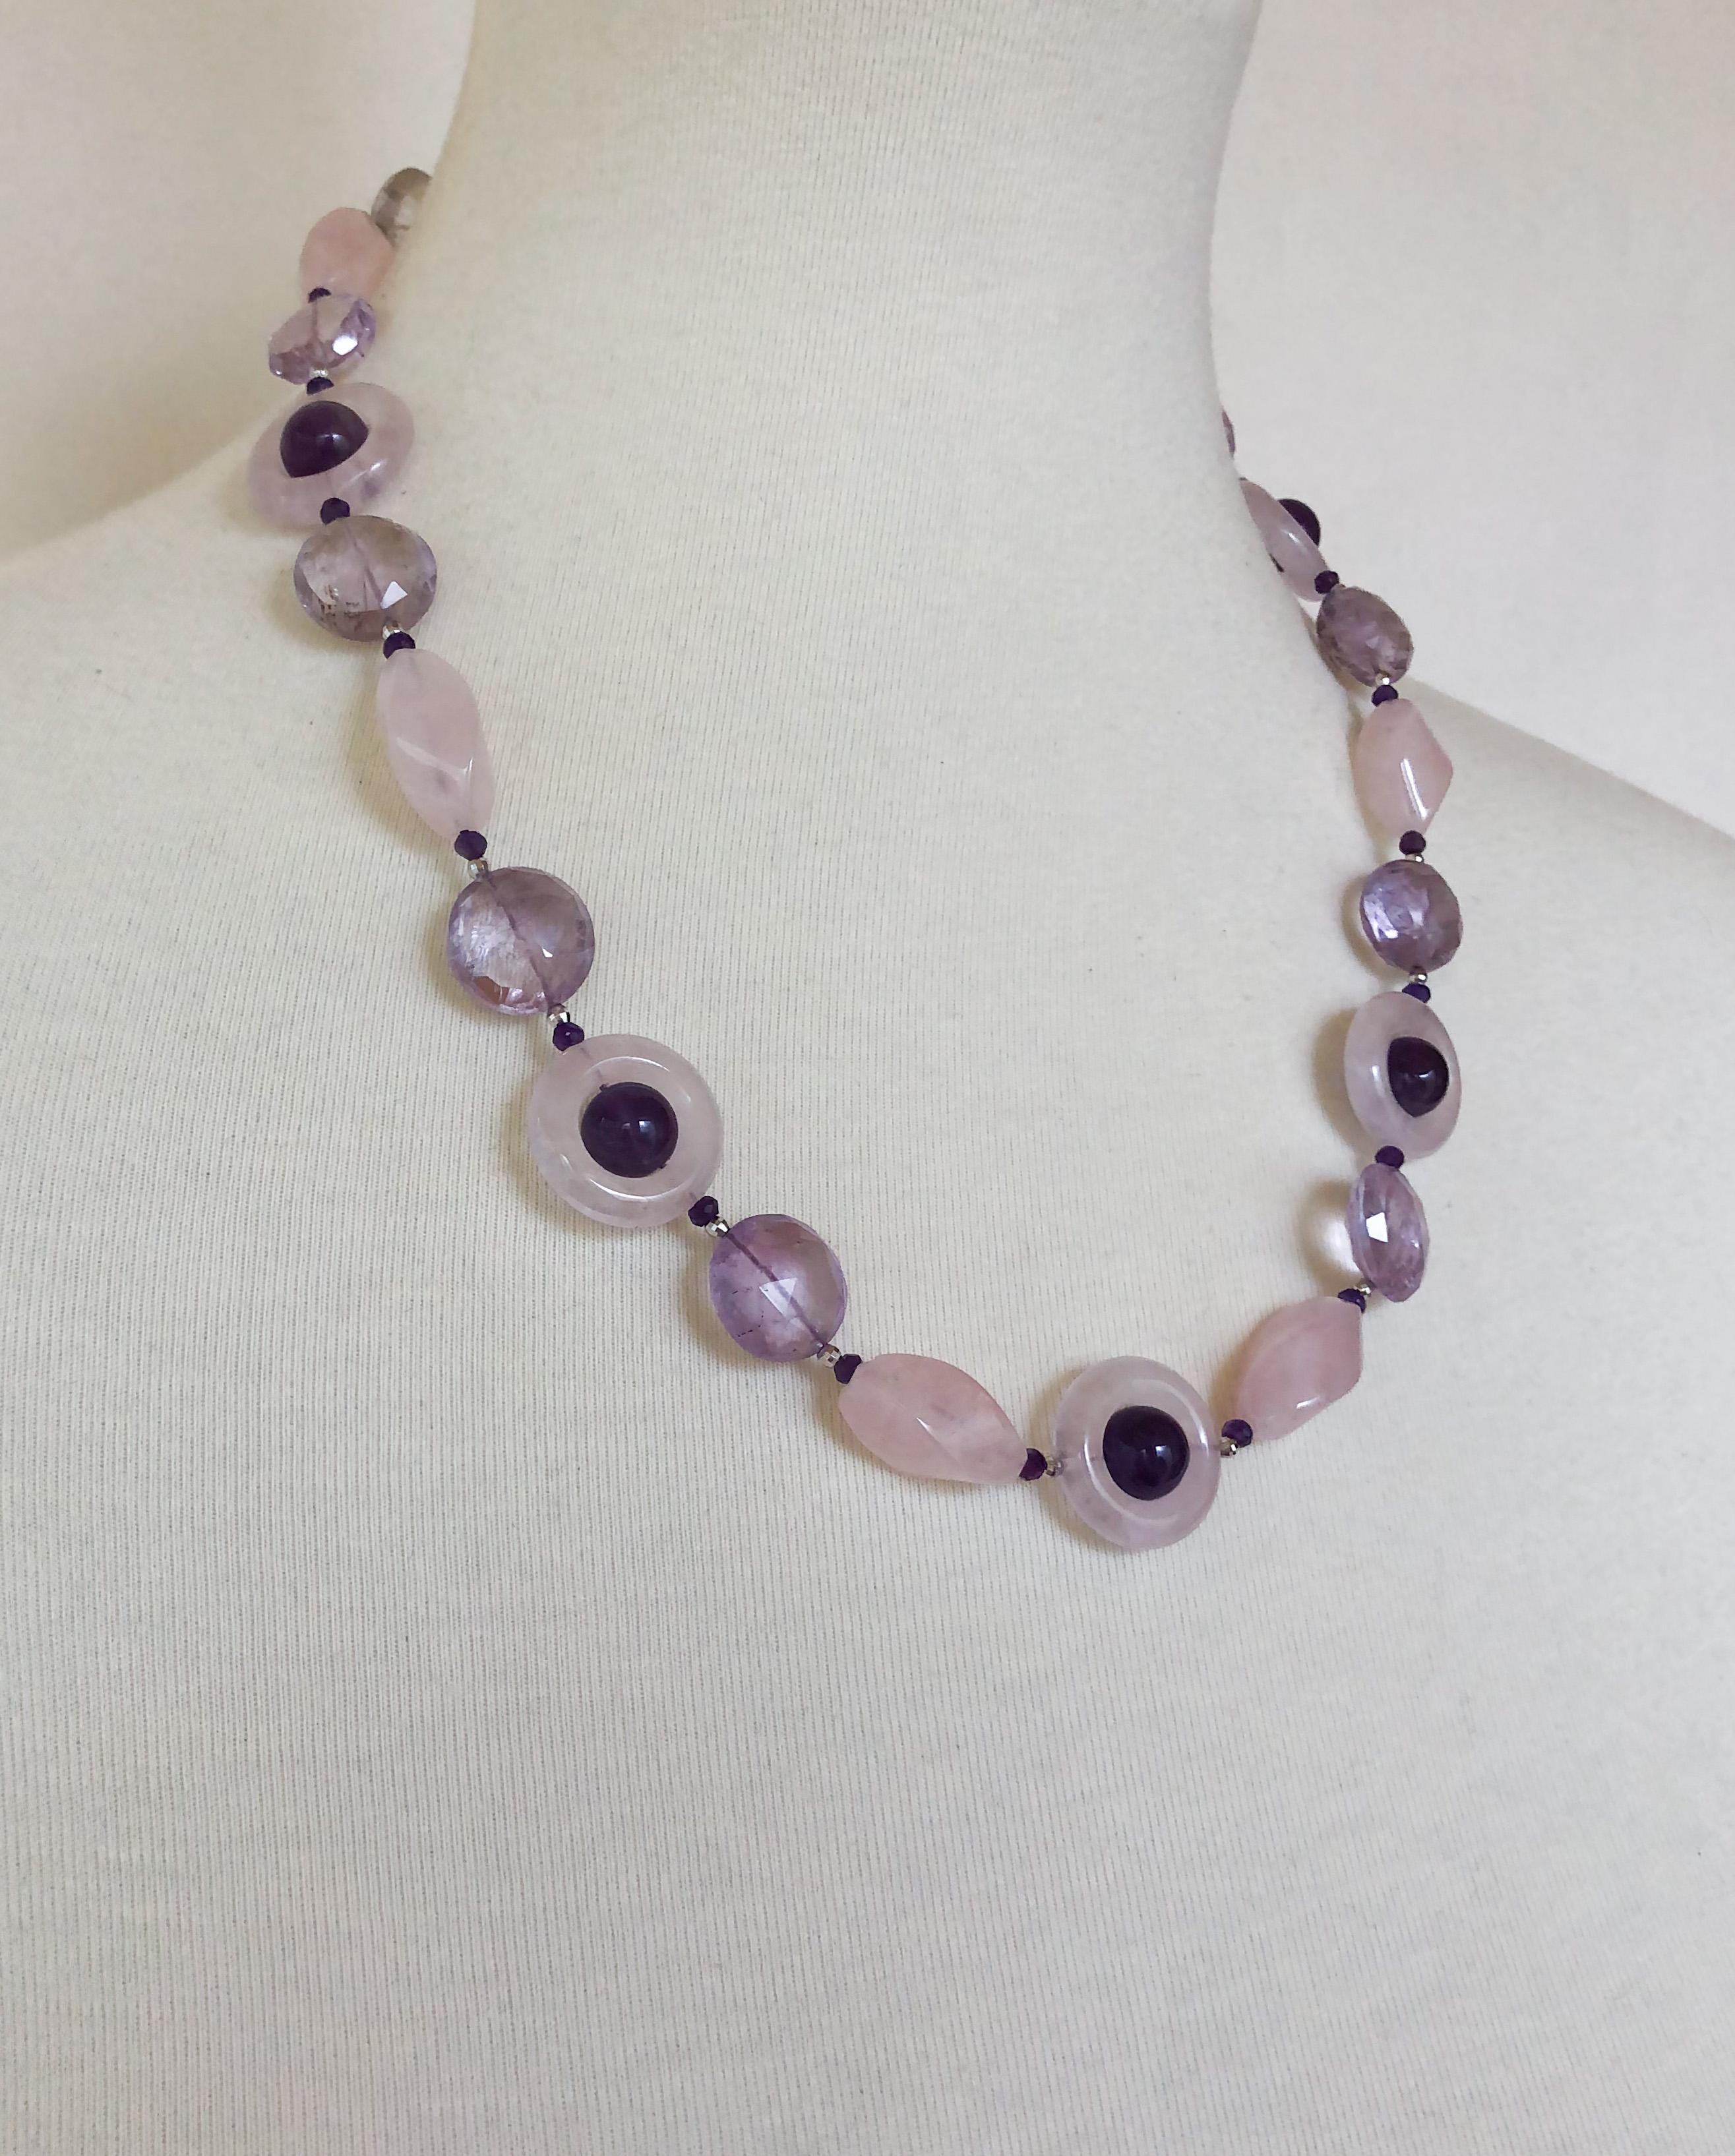 Amazing stone necklace by Marina J. This lovely piece is made with multi shaped and faceted Amethysts, Rose Quartz, Pink Aquamarine and Rhodium plated Silver findings all strung together. Each stones display a beautiful translucence that allows them